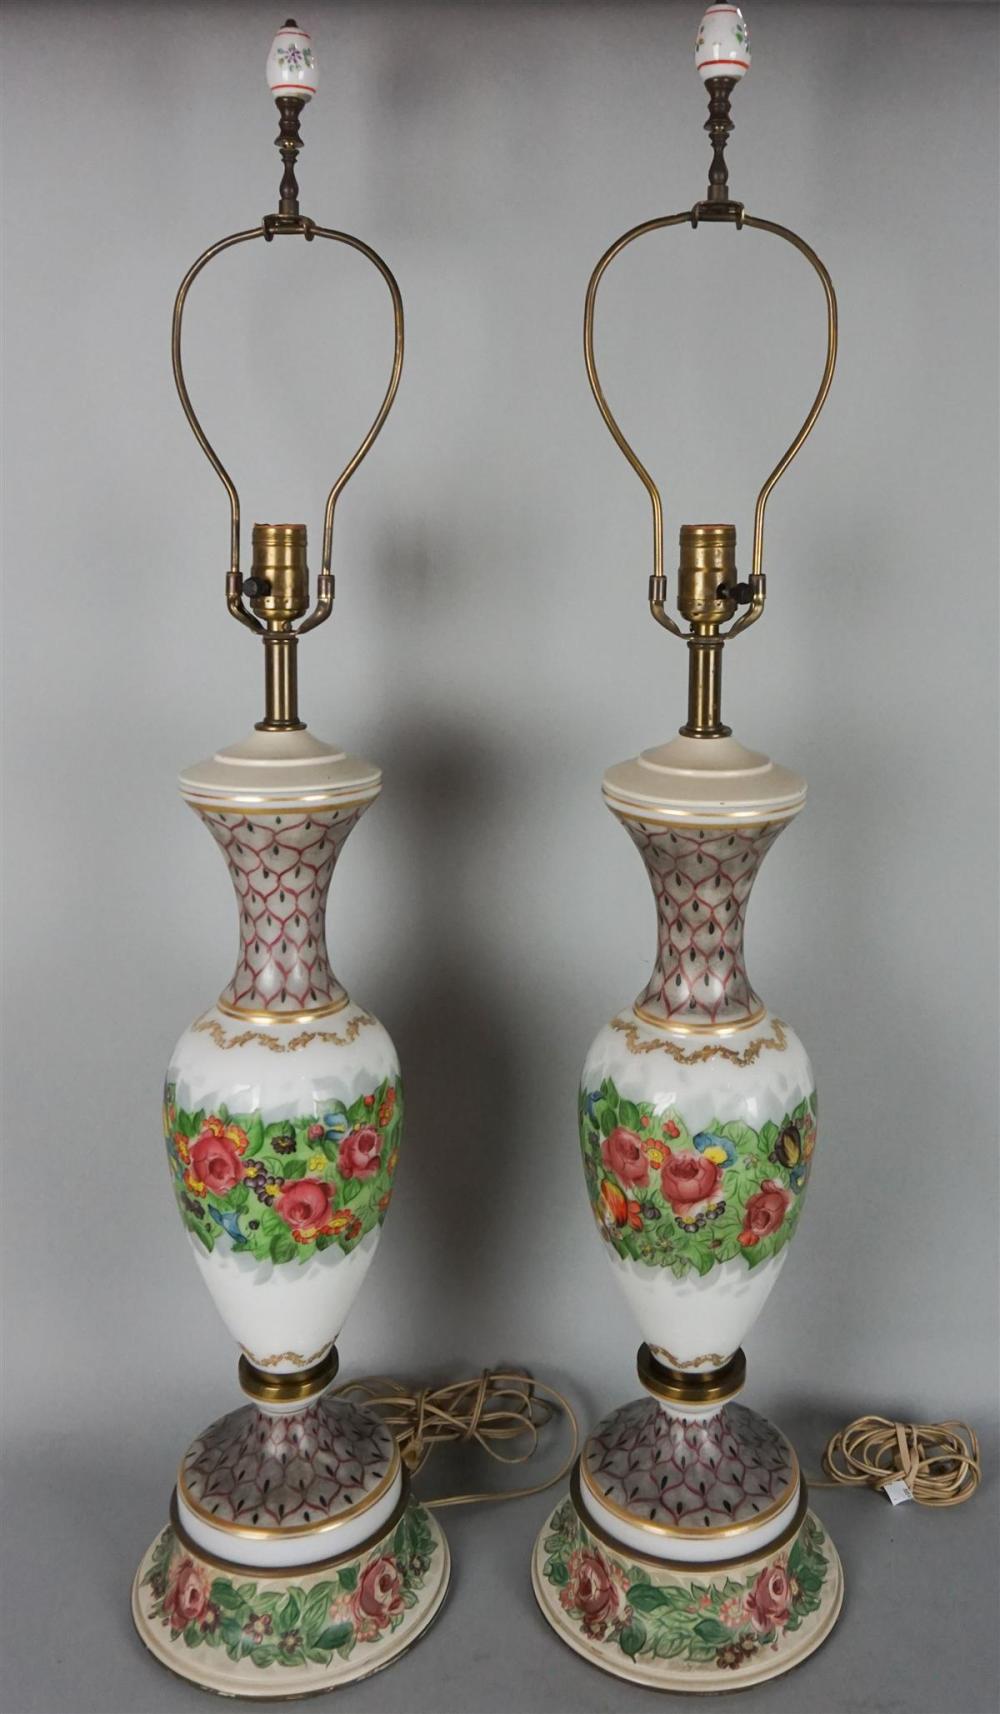 PAIR OF ENAMELED GLASS VASES NOW 312bc3